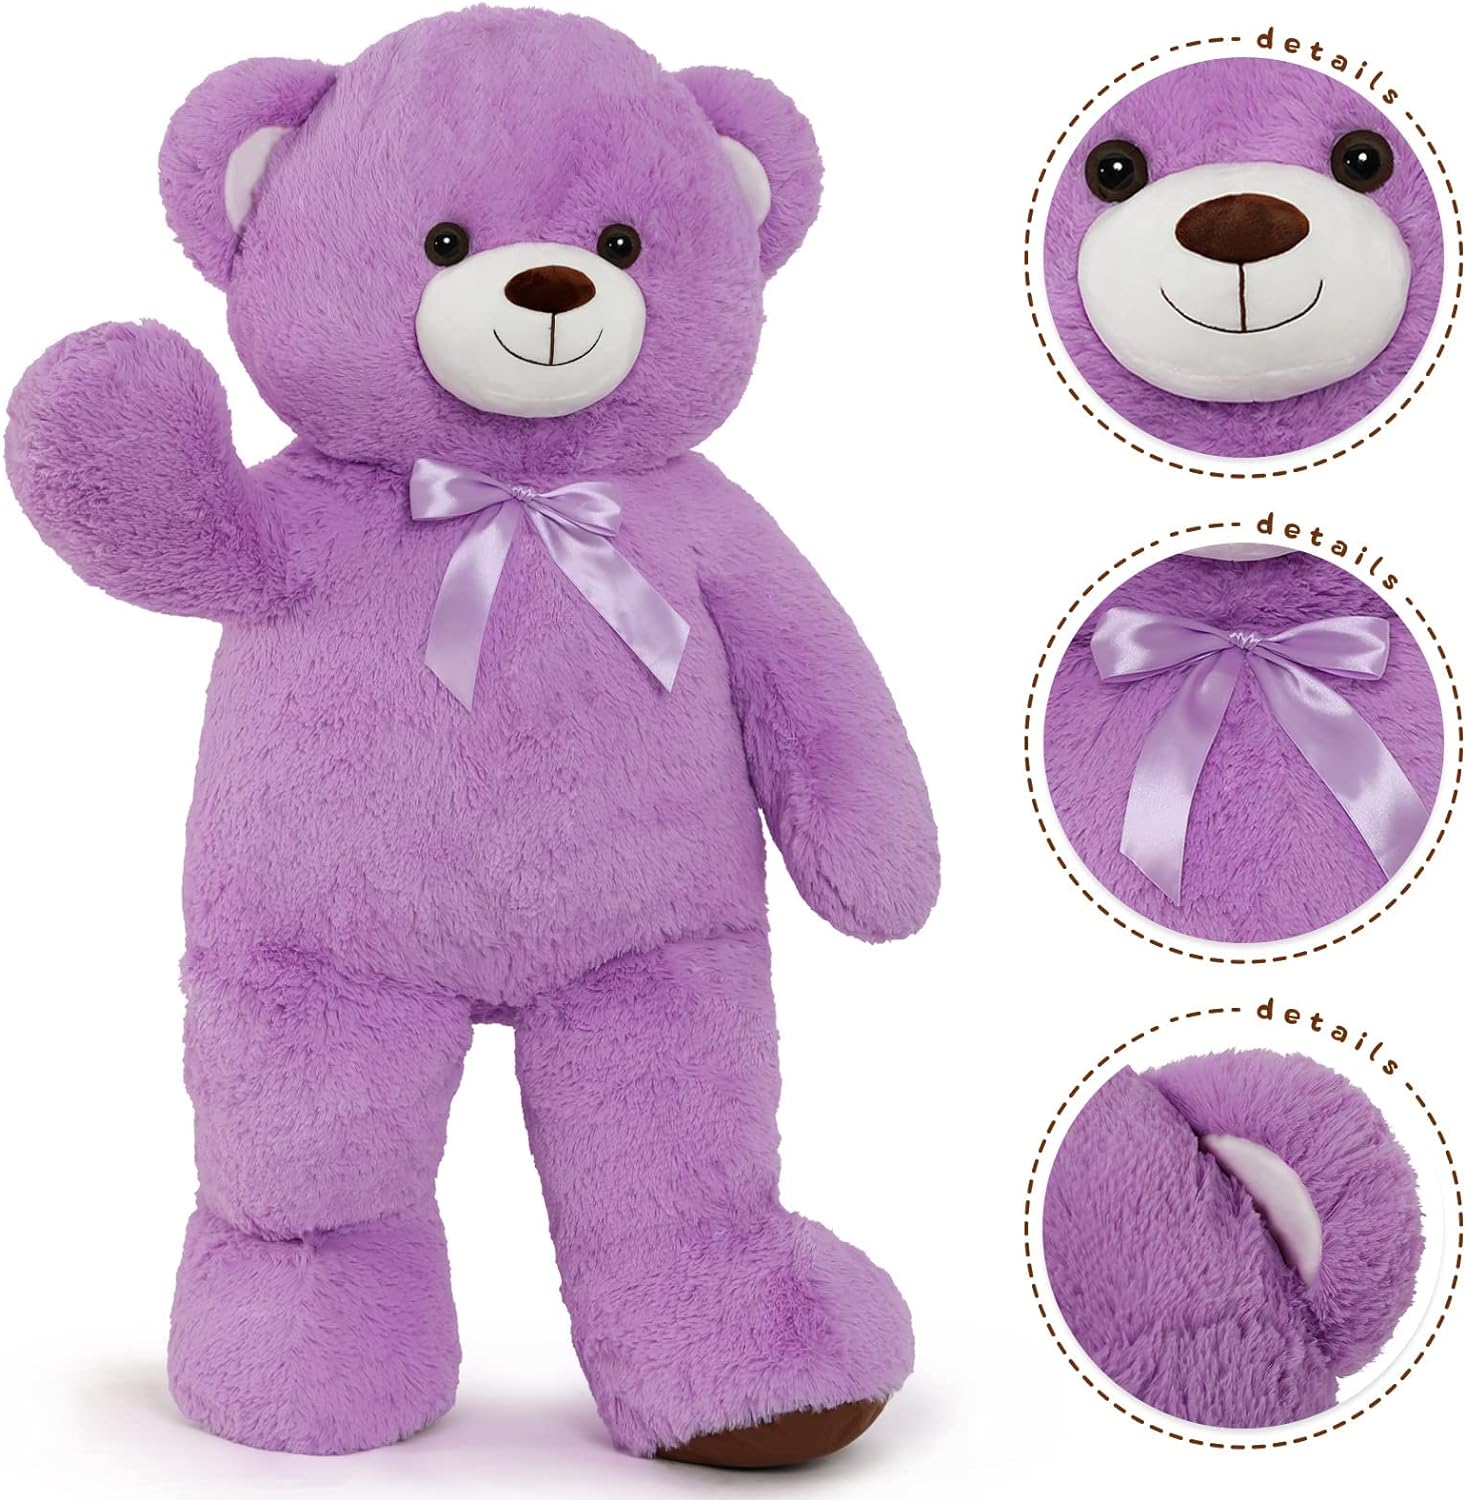 Giant Teddy Bear Stuffed Toy, Multicolor, 41 Inches